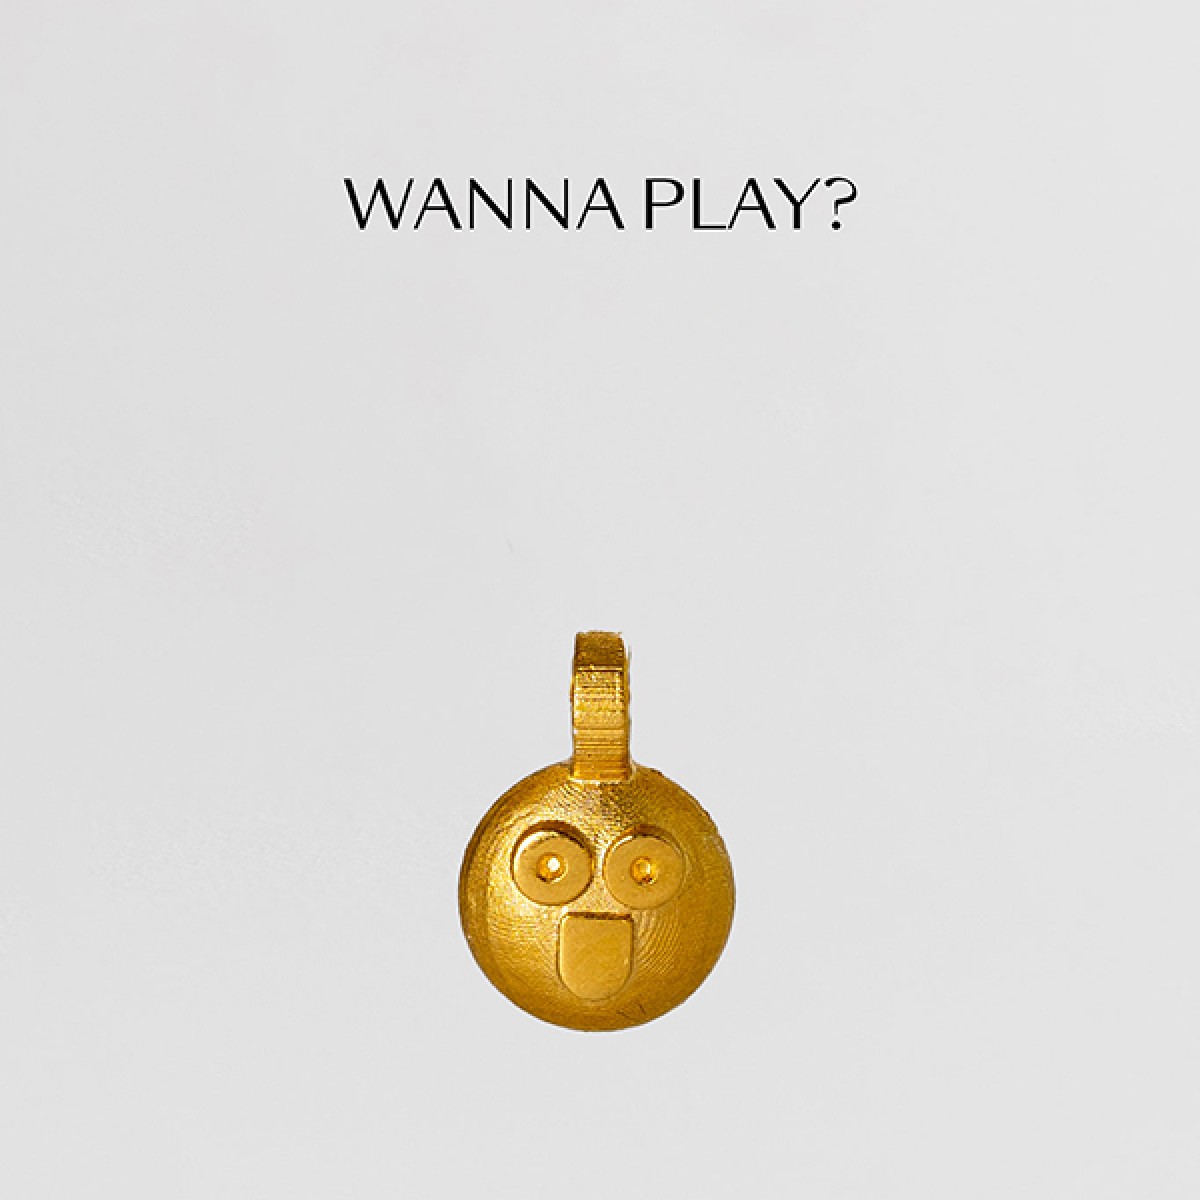 related by objects - vibe necklace - wanna play? - 925 Sterlingsilber - goldplattiert 